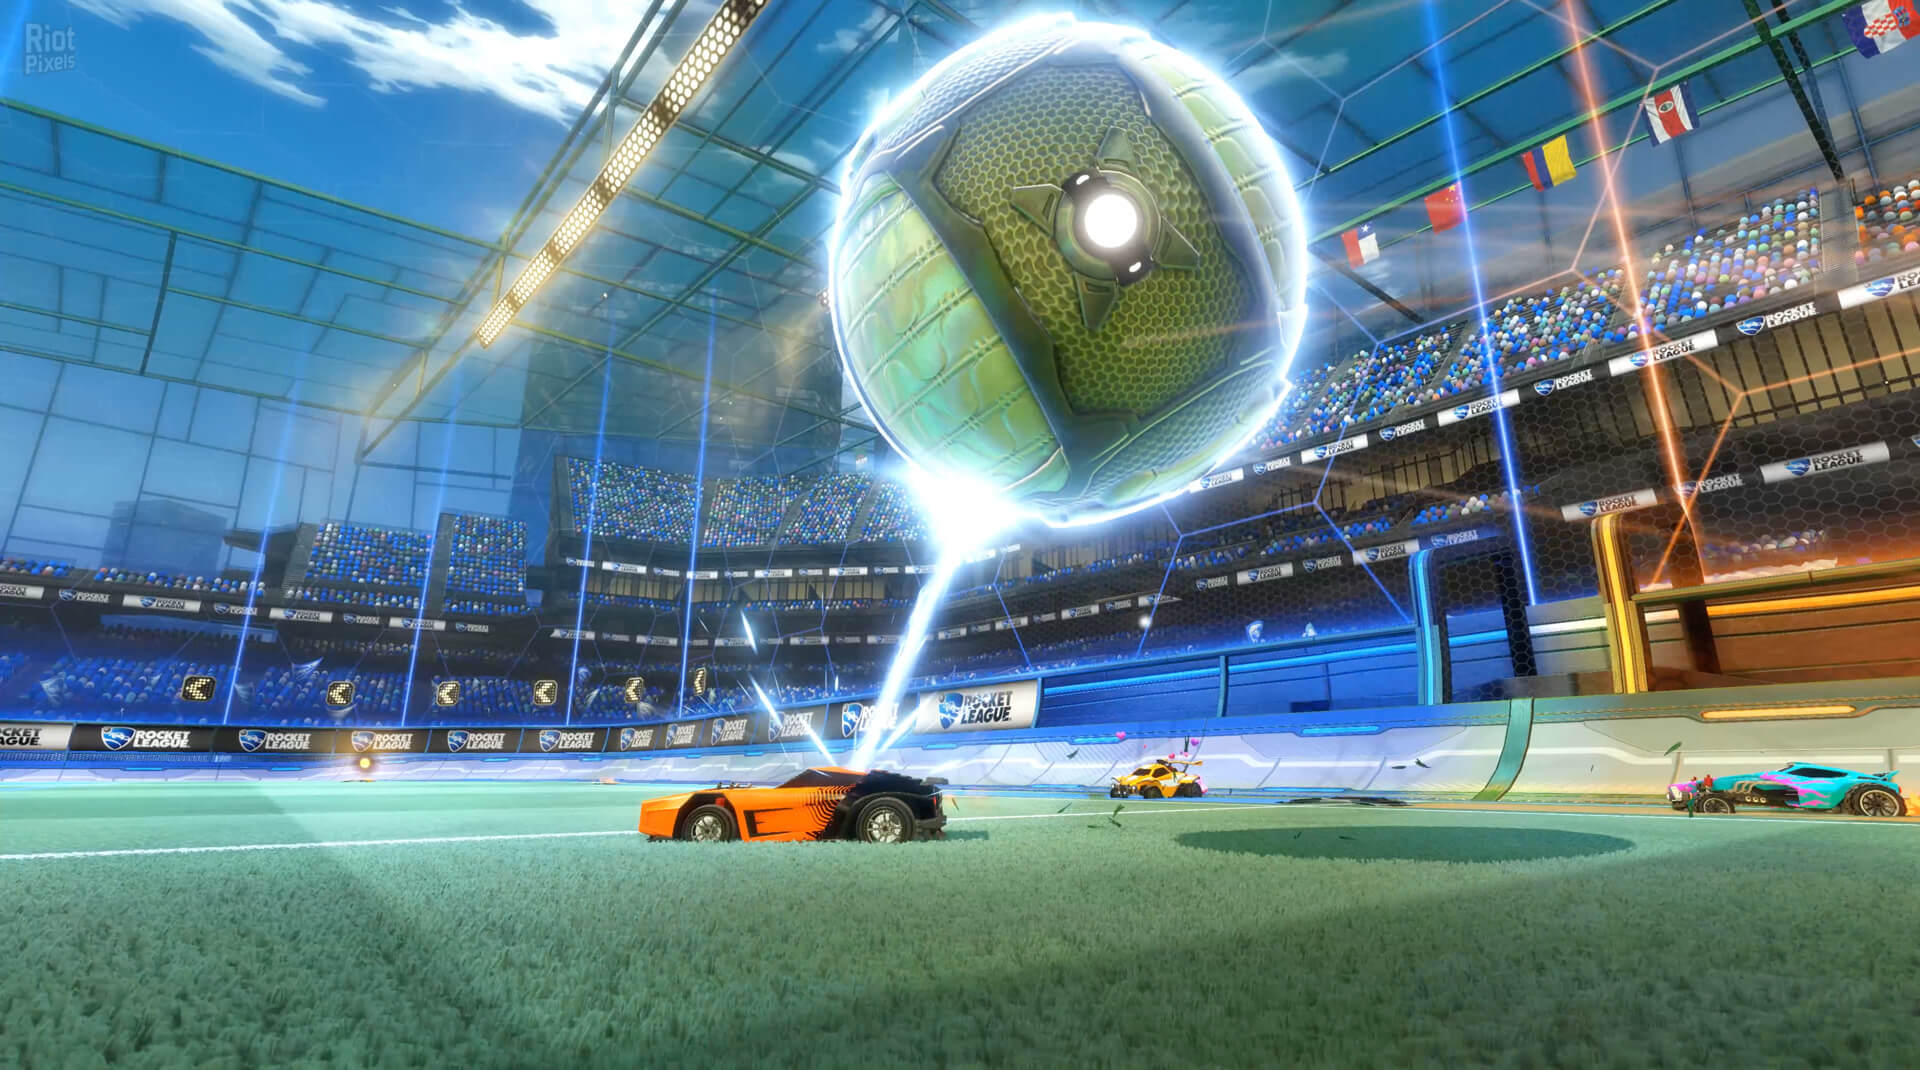 Download Rocket League Highly Compressed For PC in 500 MB Parts - TraX Gaming Center